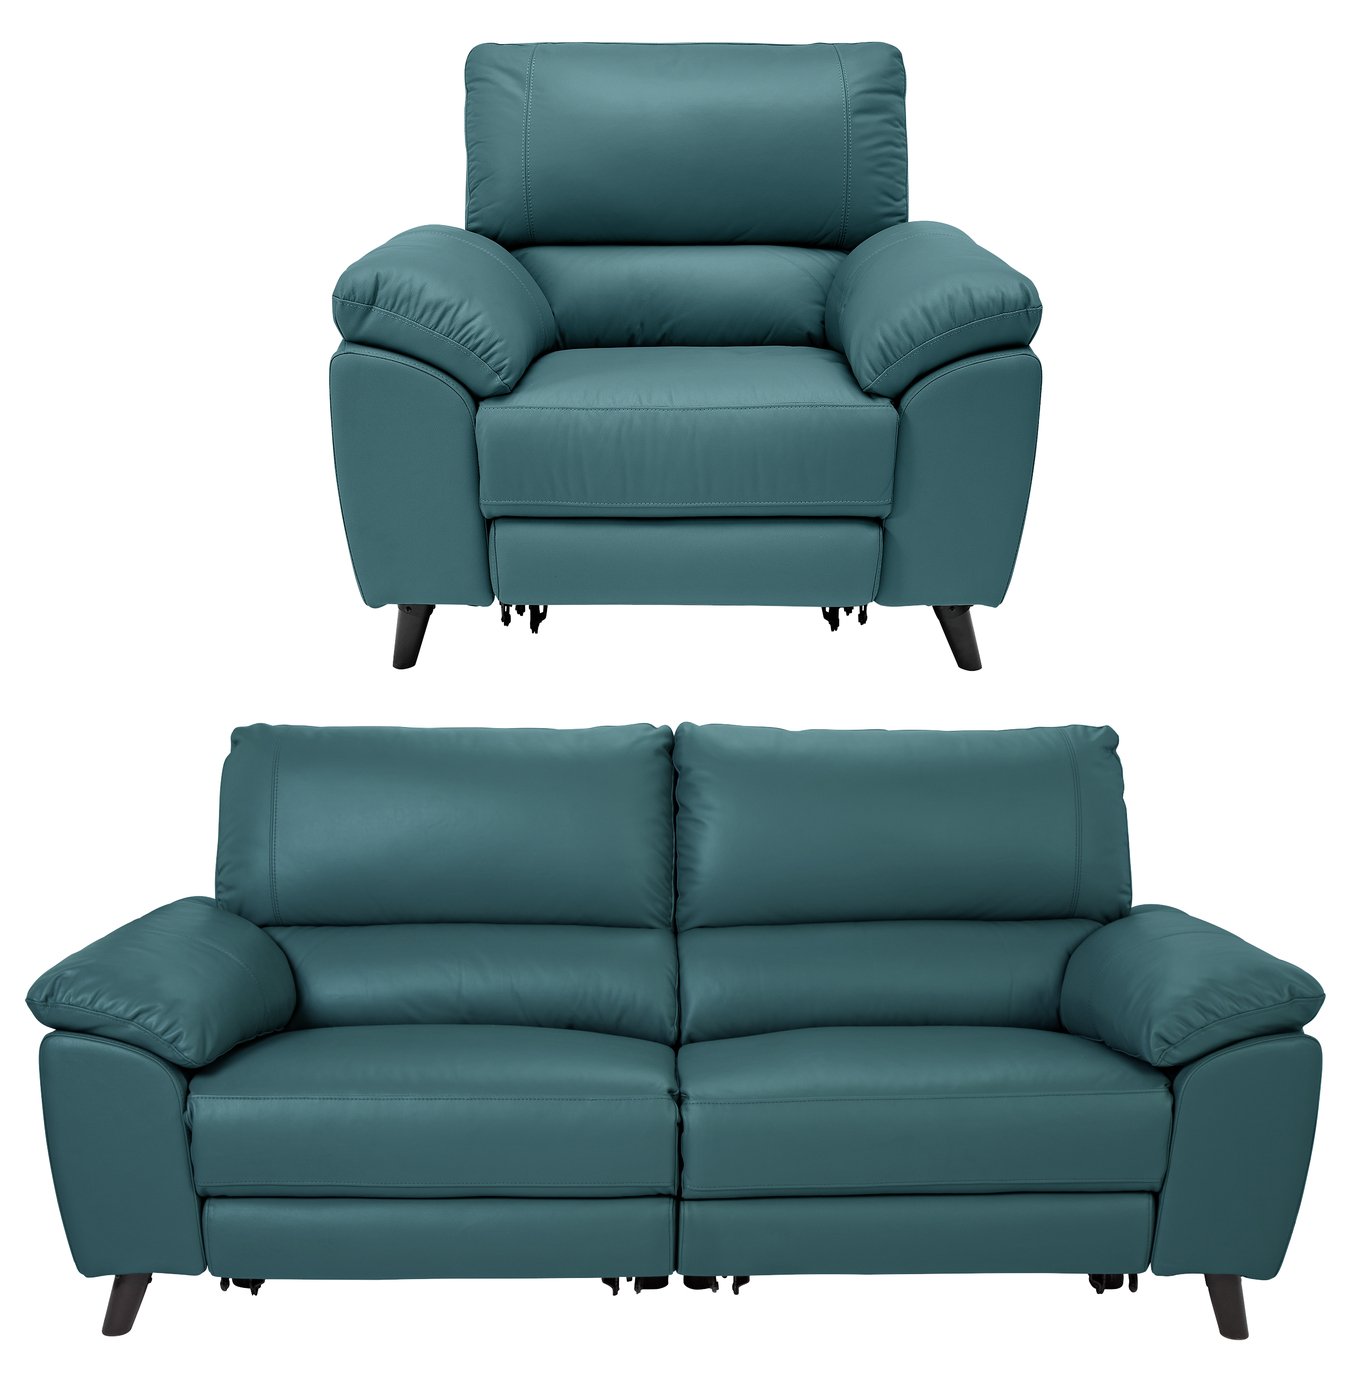 Argos Home Elliot Chair and 3 Seater Recliner Sofa - Teal